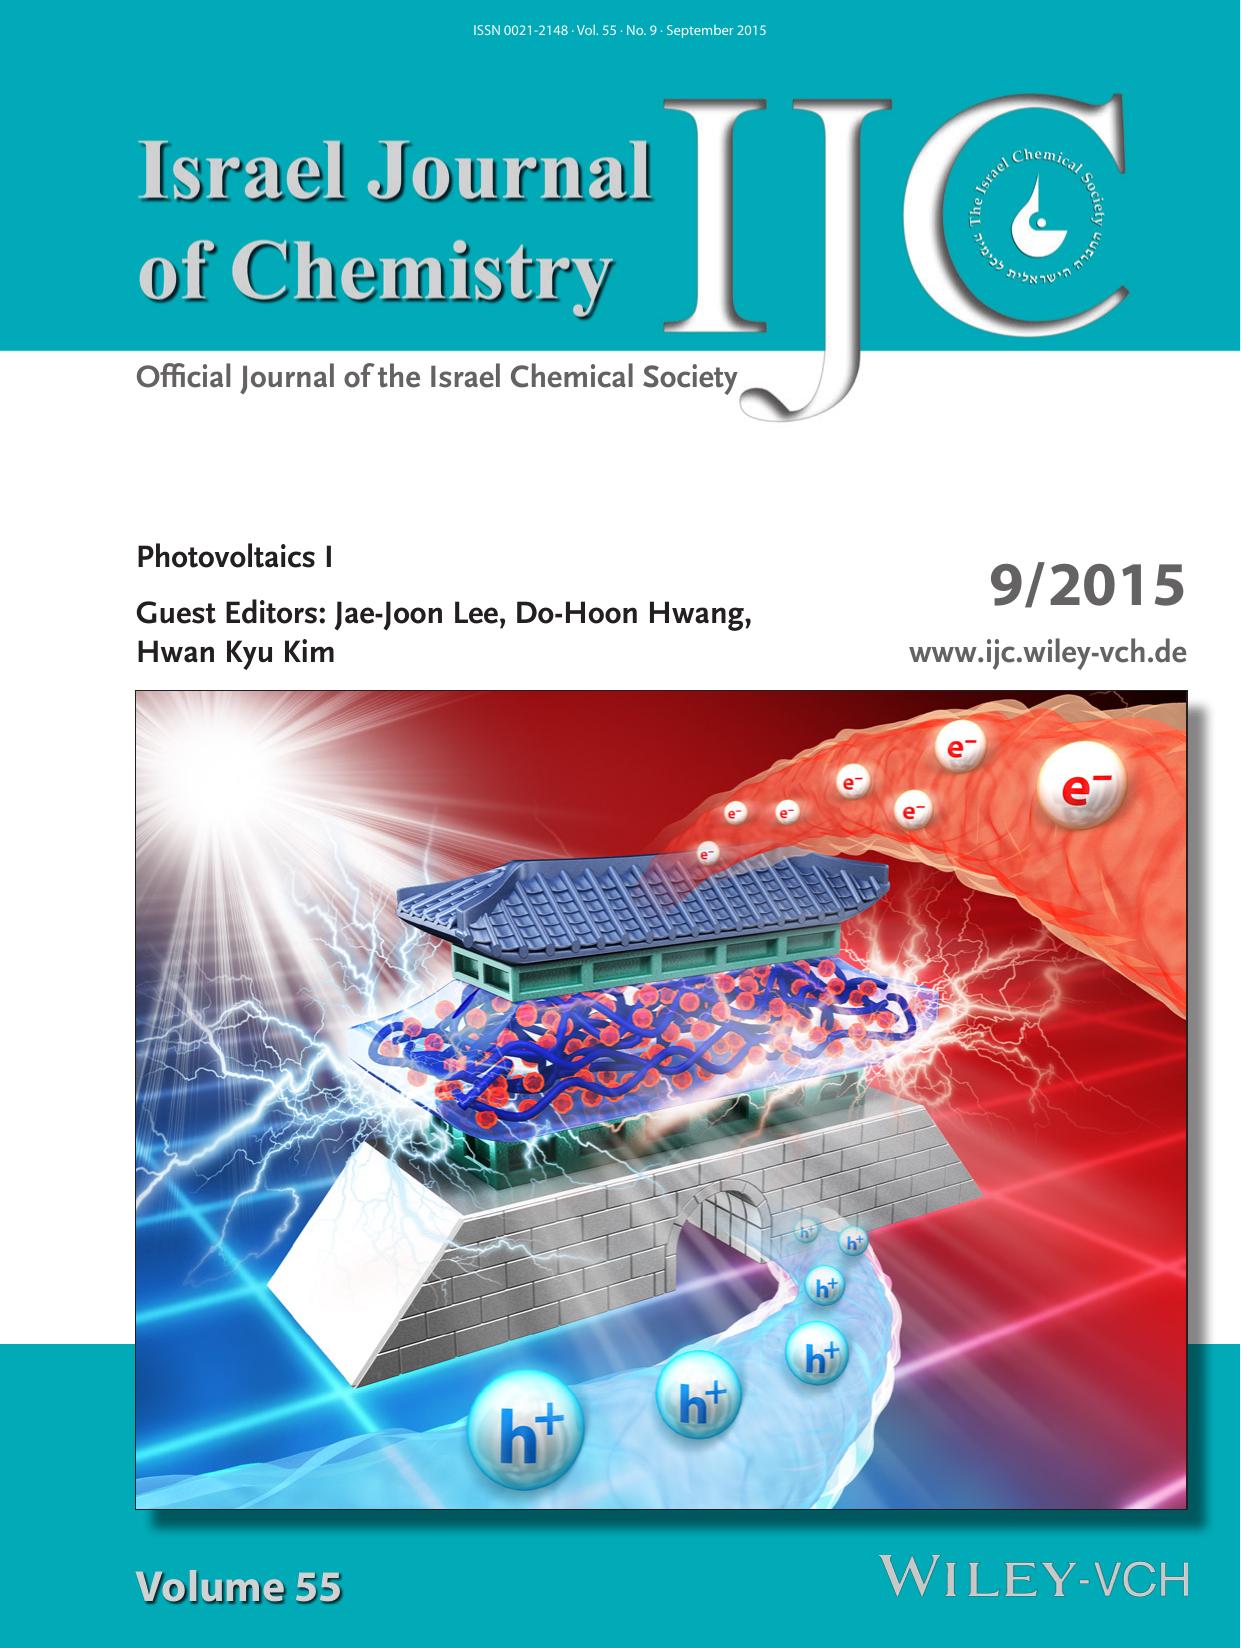 Cover Picture: Guest Editorial (Isr. J. Chem. 92015) by Unknown